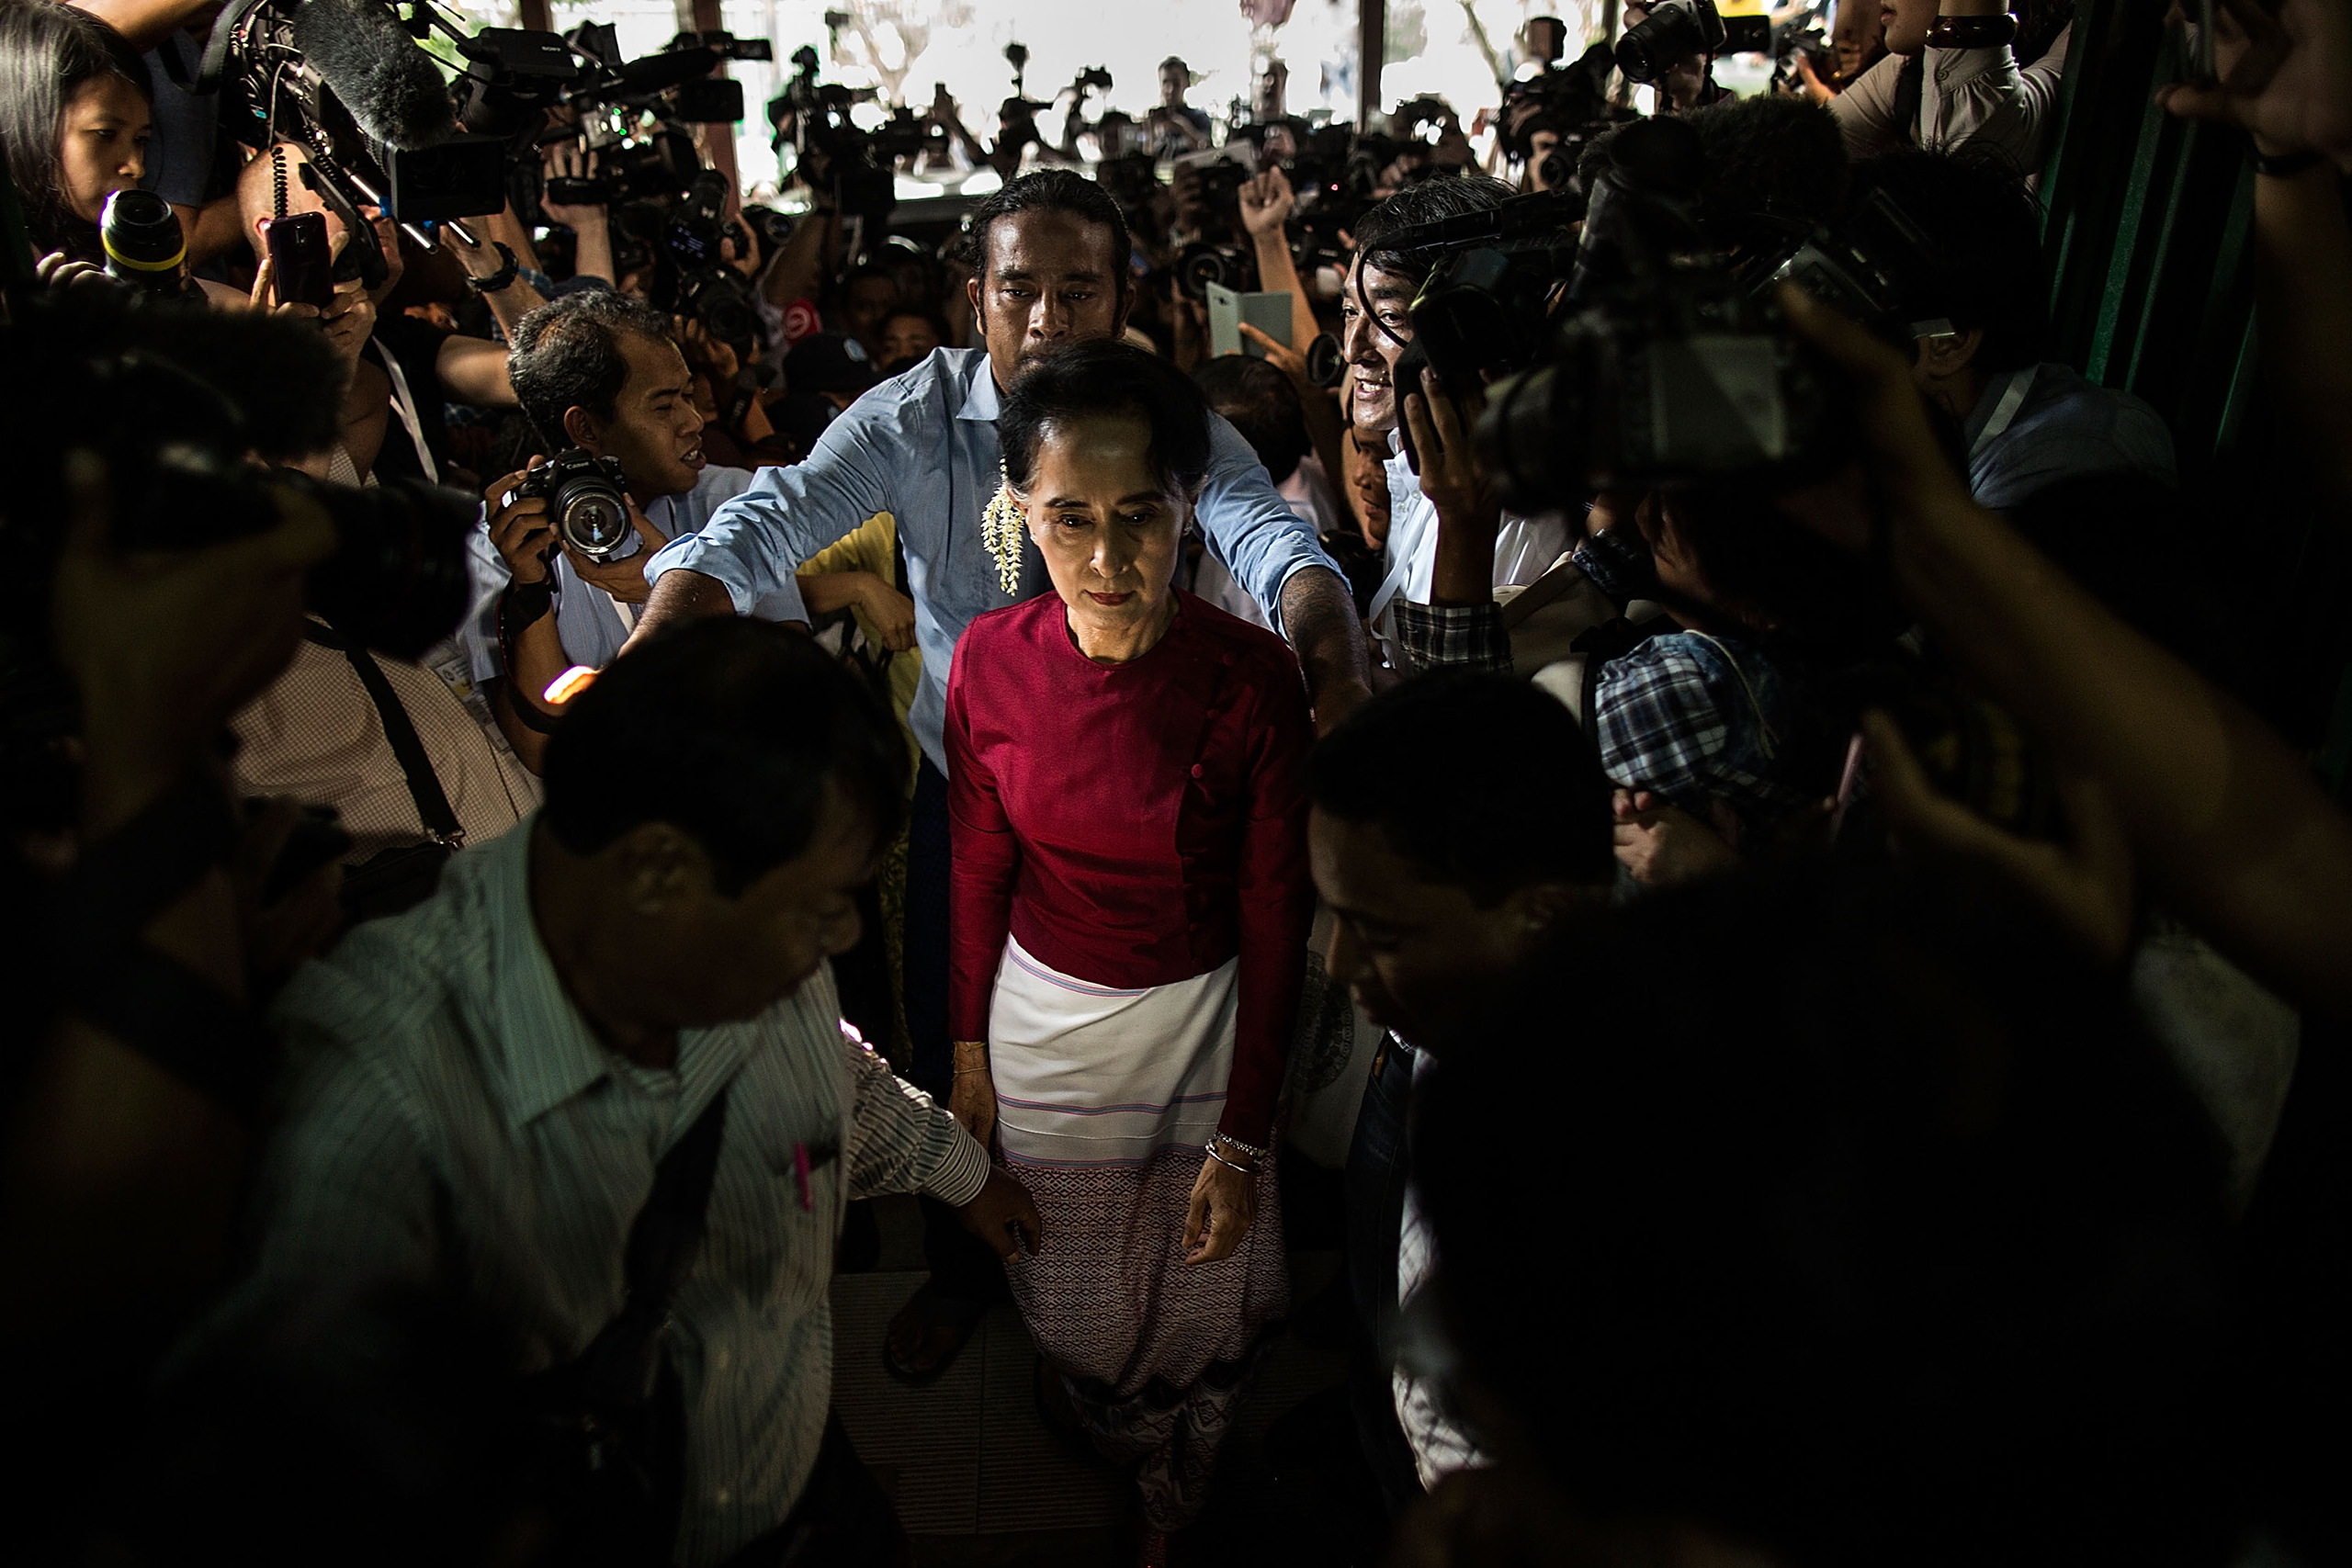 Aung San Suu Kyi arrives at the polling station to cast her vote during Myanmar's first free election in a quarter-century in Yangon, Myanmar, on Nov. 8, 2015 (Lam Yik Fei—Getty Images)